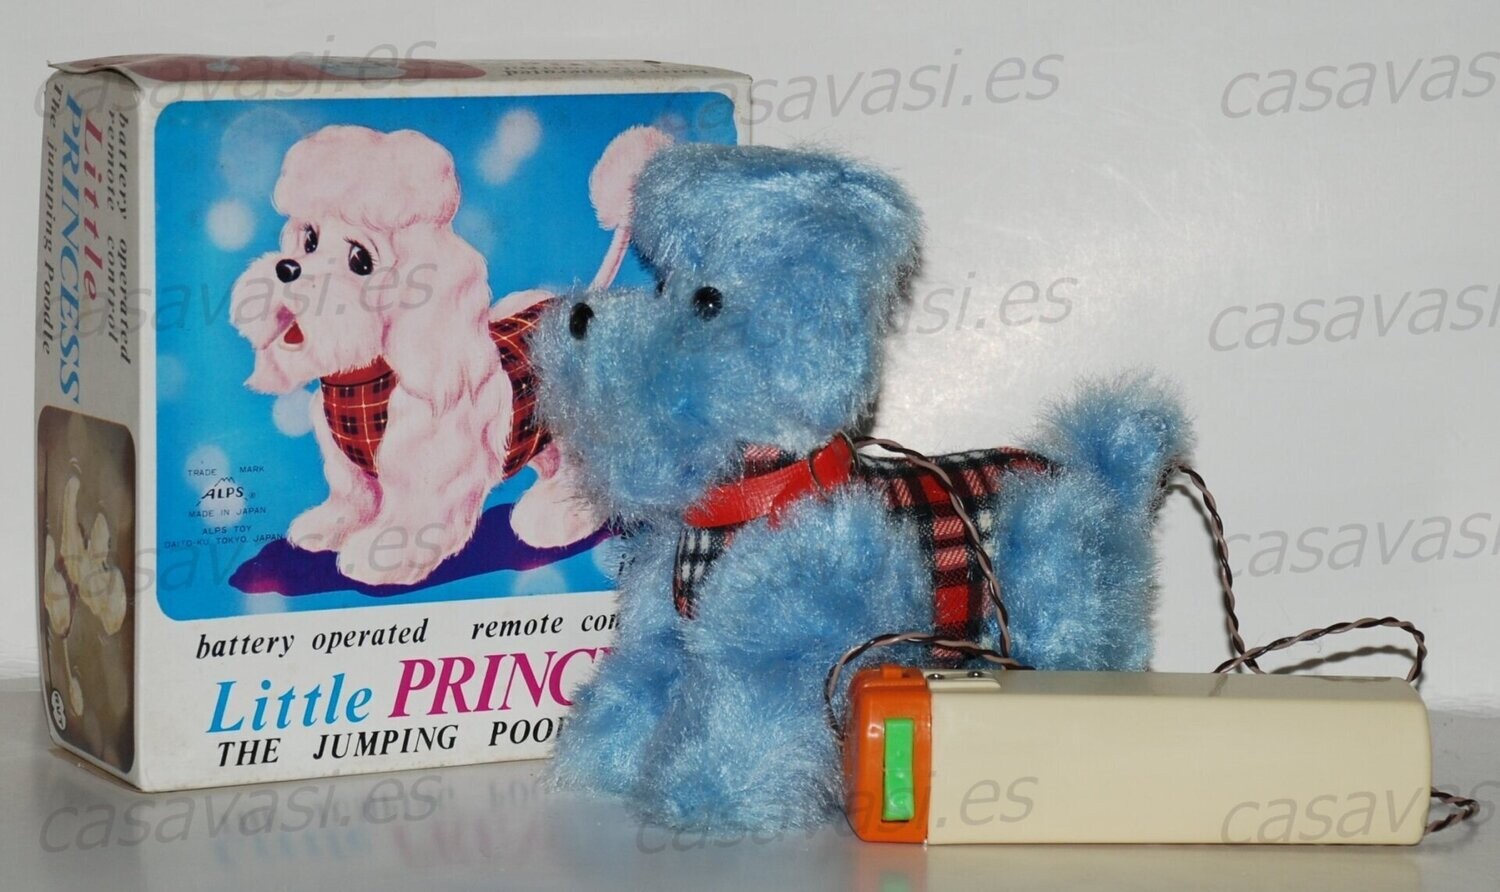 Little Princess - Blue - The Jumping Poodle
Perrito Saltarin - Azul
Box Size 18´5 x 18´5